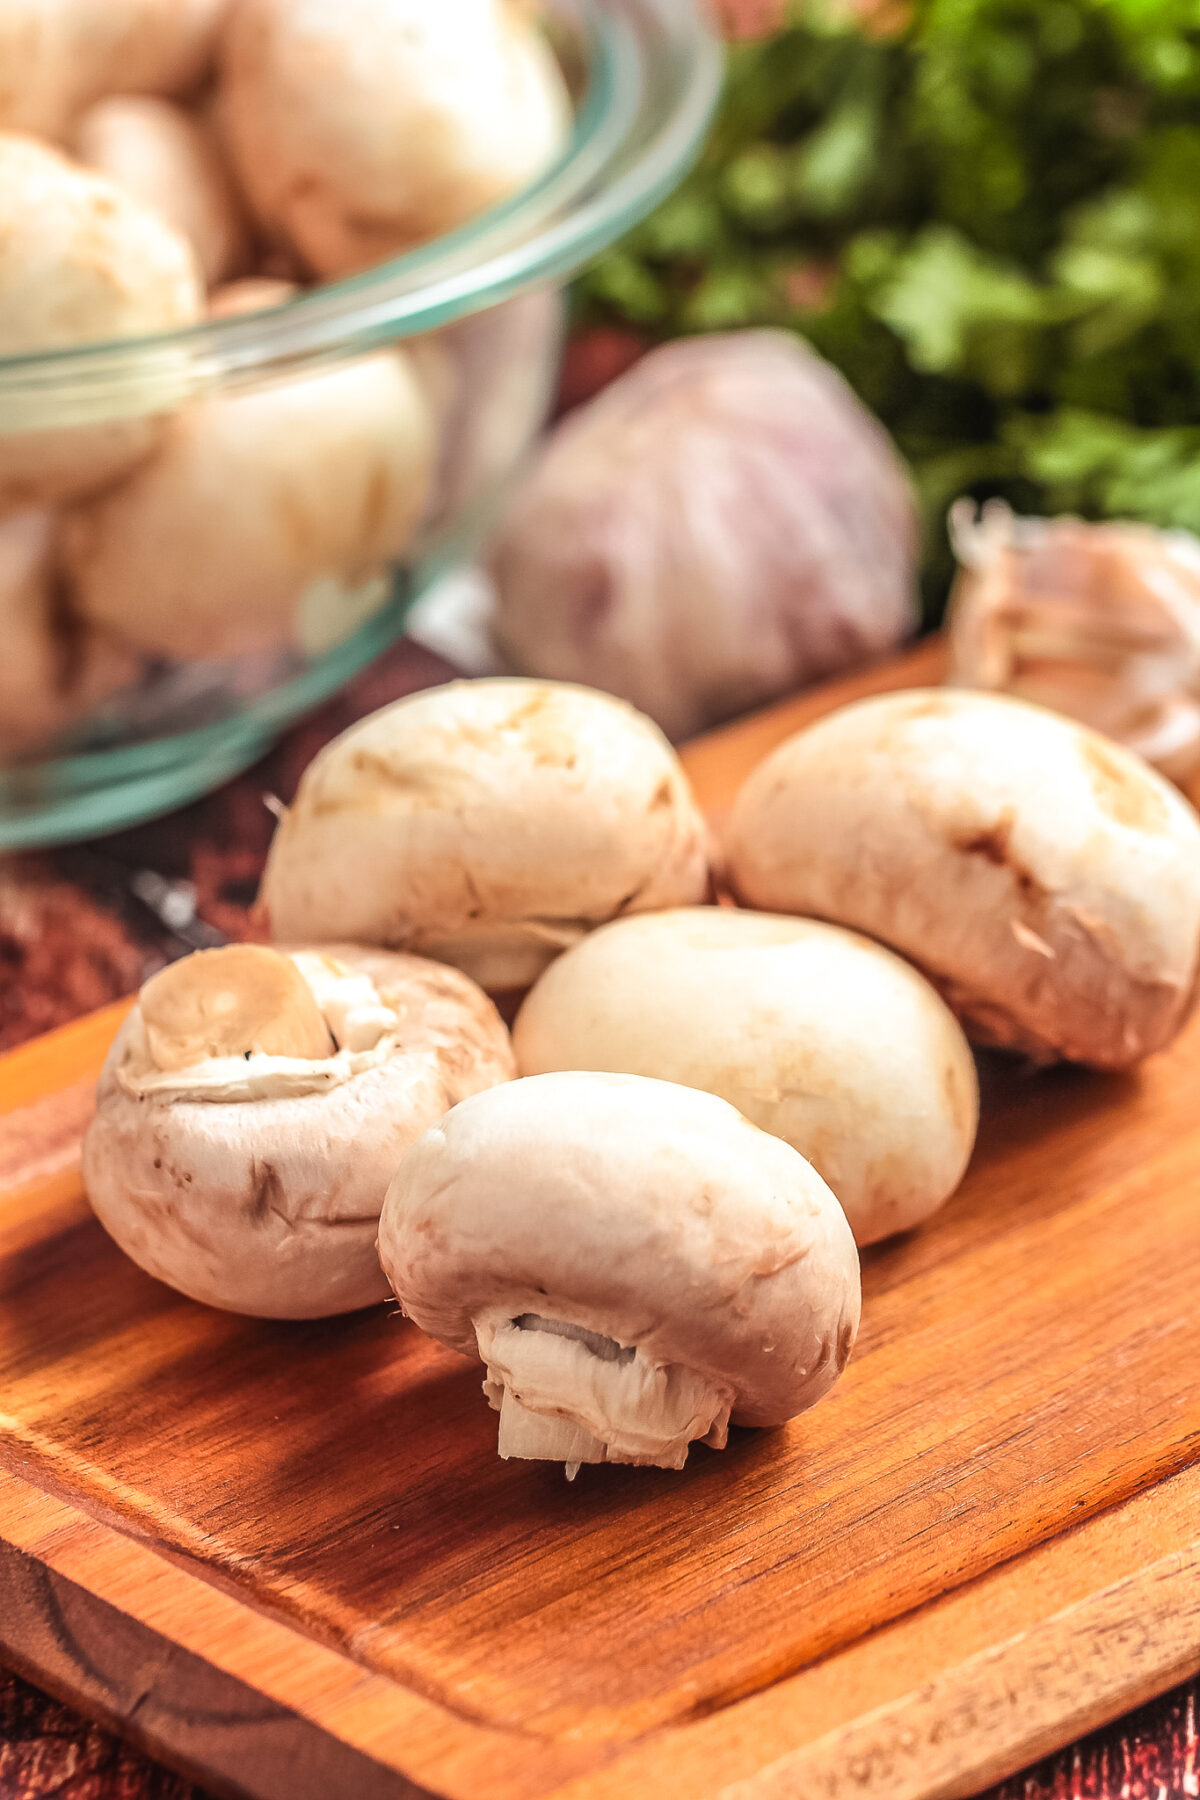 White button mushrooms on a cutting board.